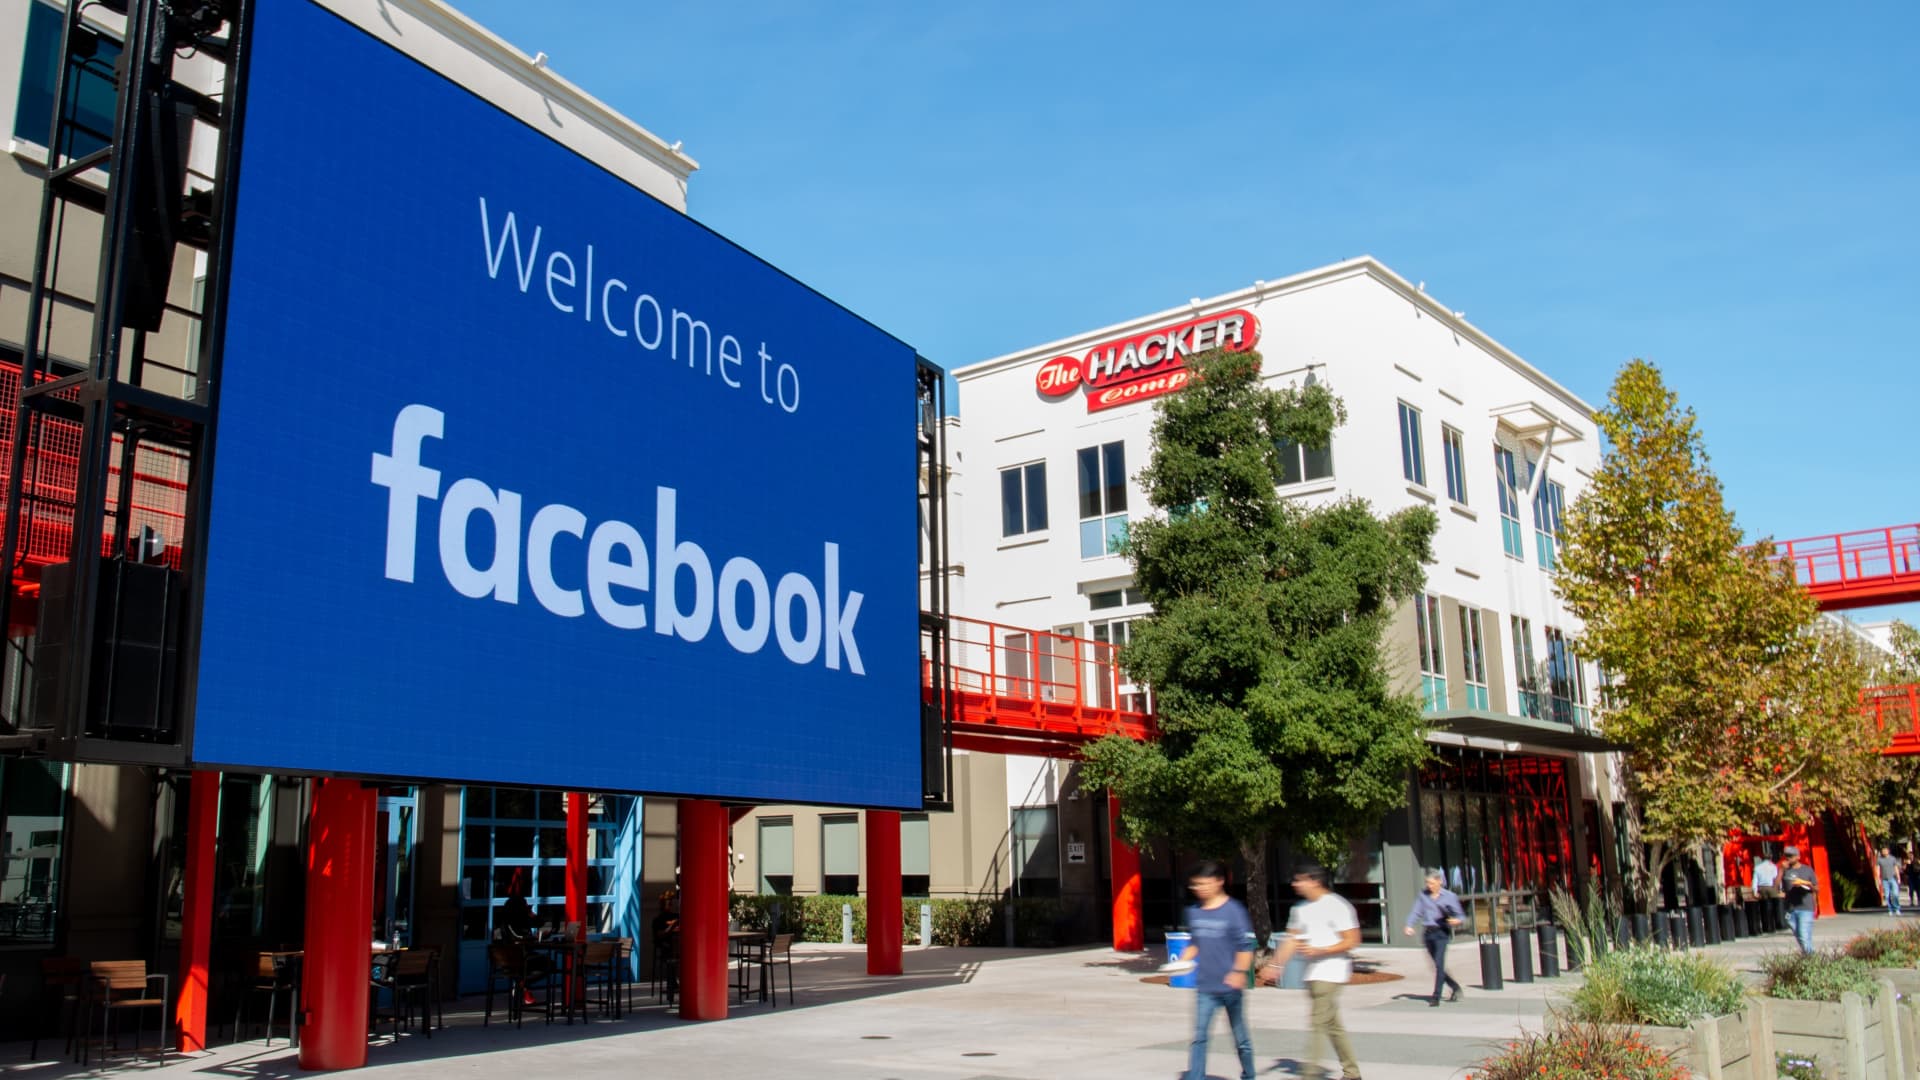 A giant digital sign is seen at Facebook's corporate headquarters campus in Menlo Park, California, on October 23, 2019.